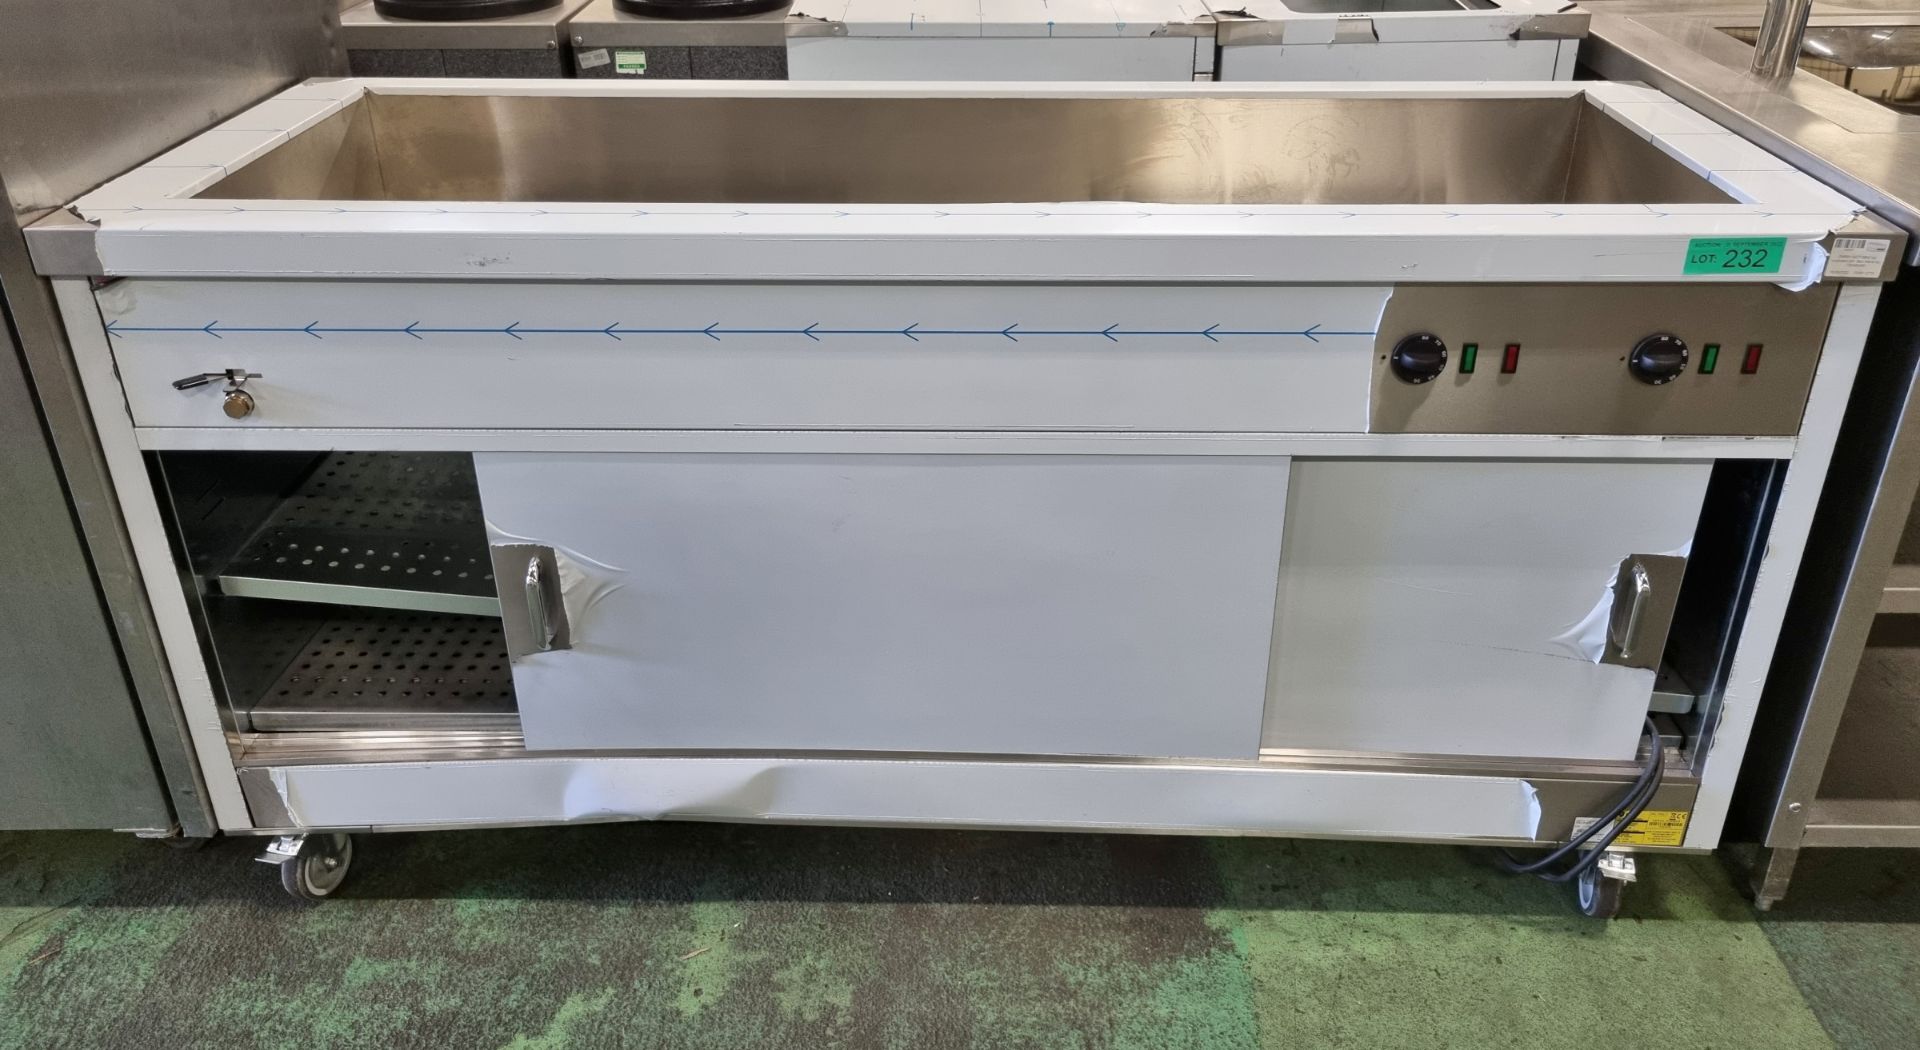 Parry HOT18BM hot cupboard with bain marie top - 180 x 65 x 90 - Image 2 of 6